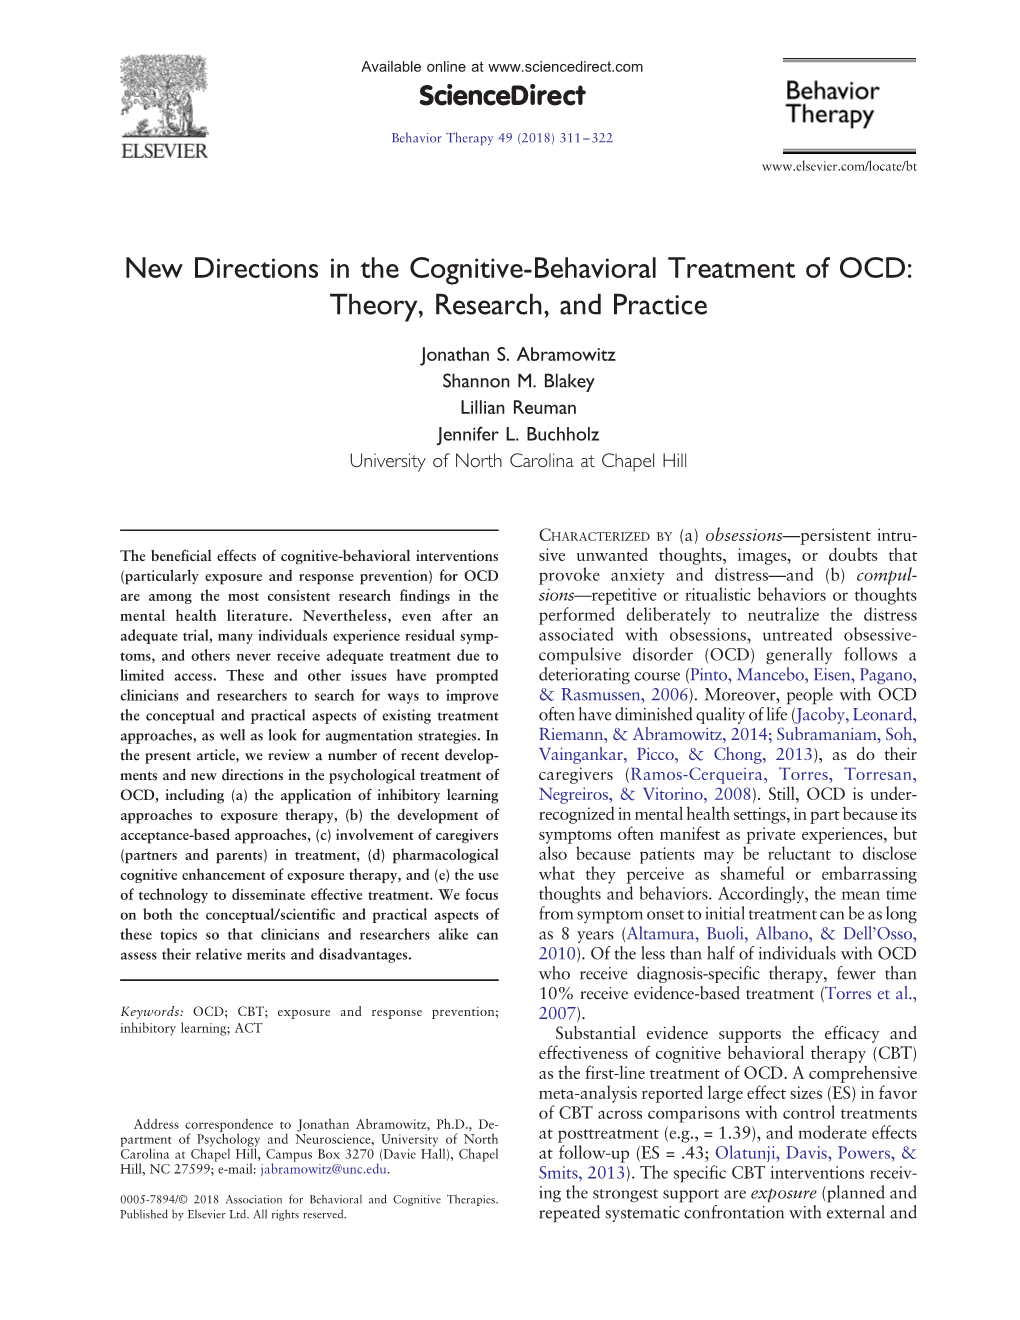 New Directions in the Cognitive-Behavioral Treatment of OCD: Theory, Research, and Practice